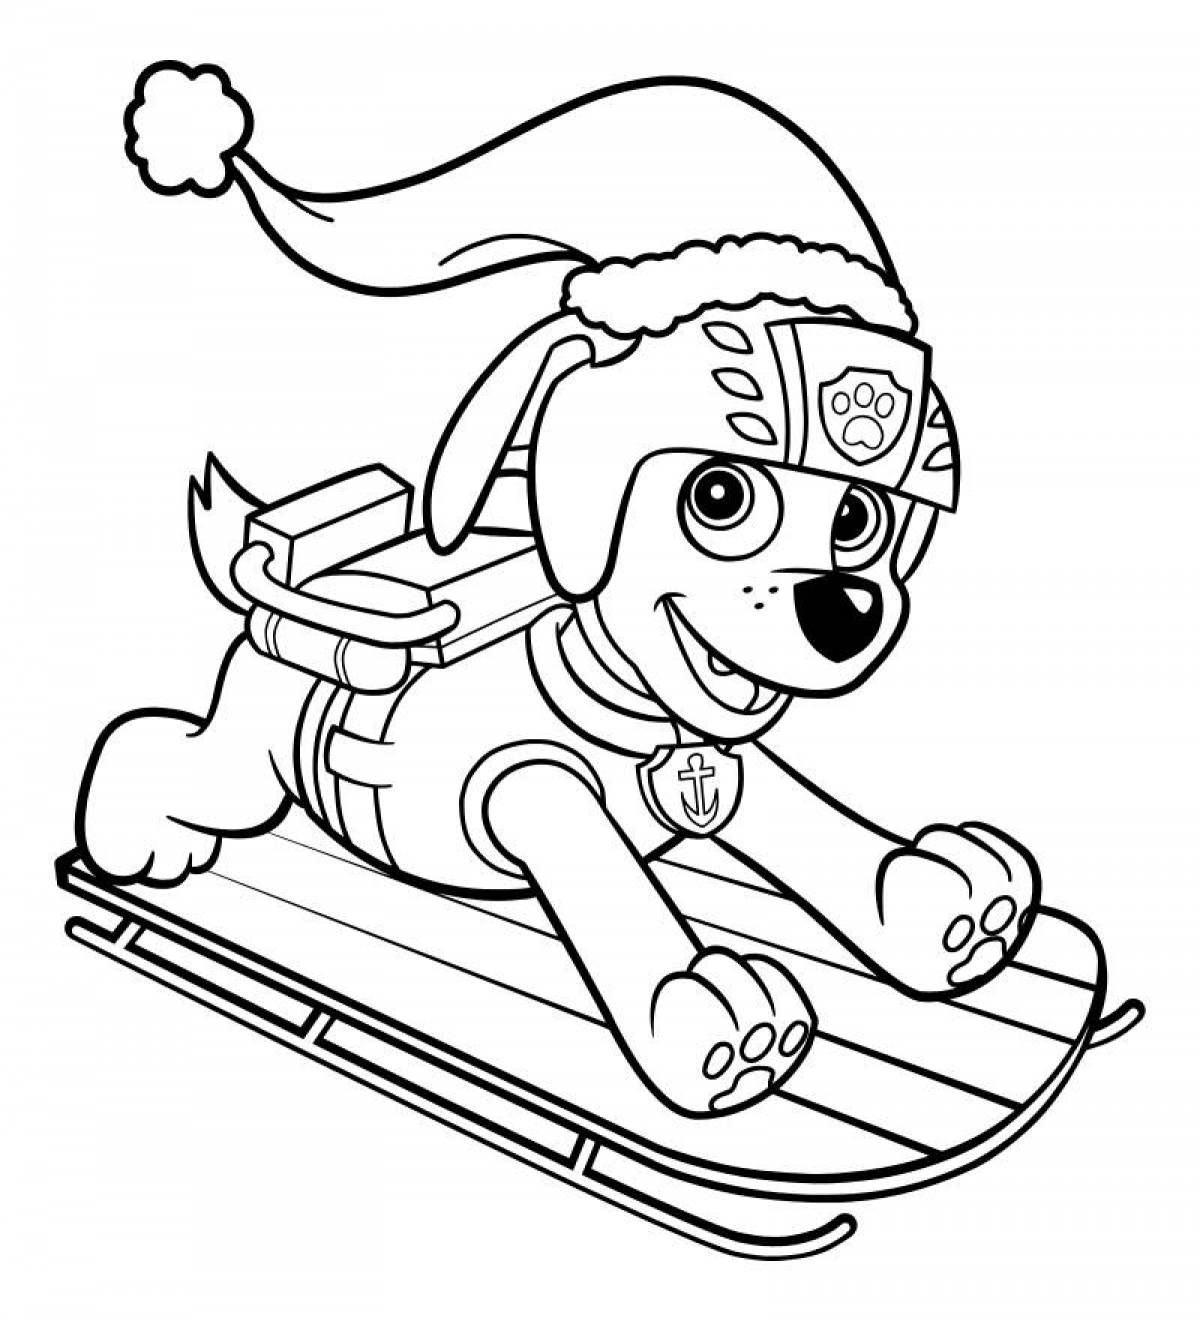 Wonderful coloring page paw patrol for girls